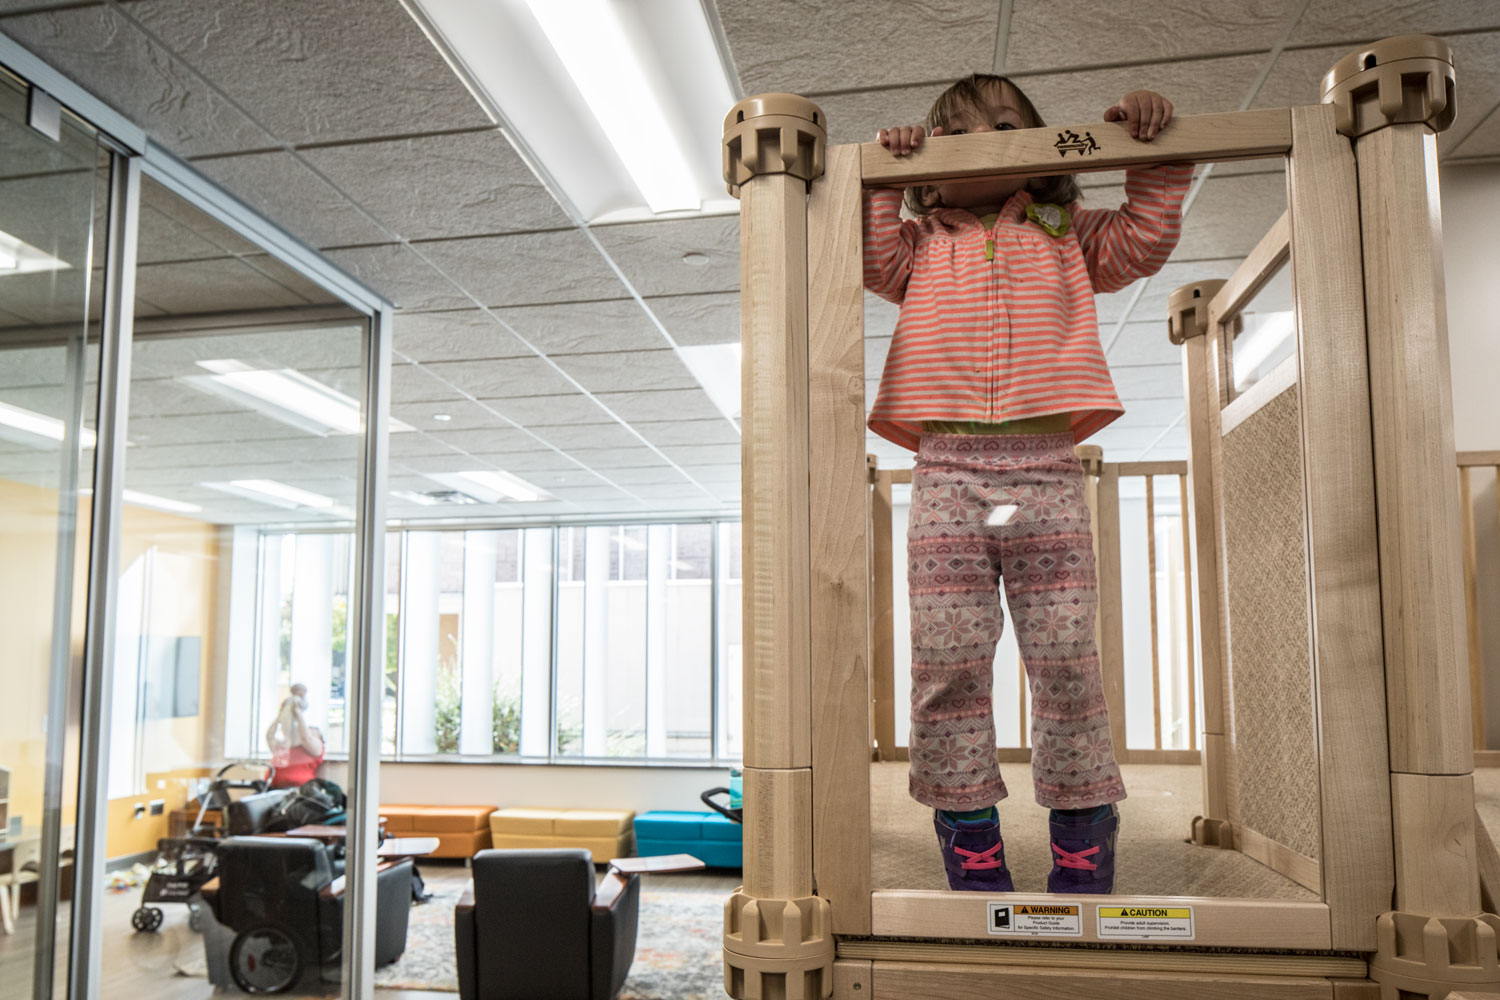 A child peeks over the railing of the play structure in the new family study room